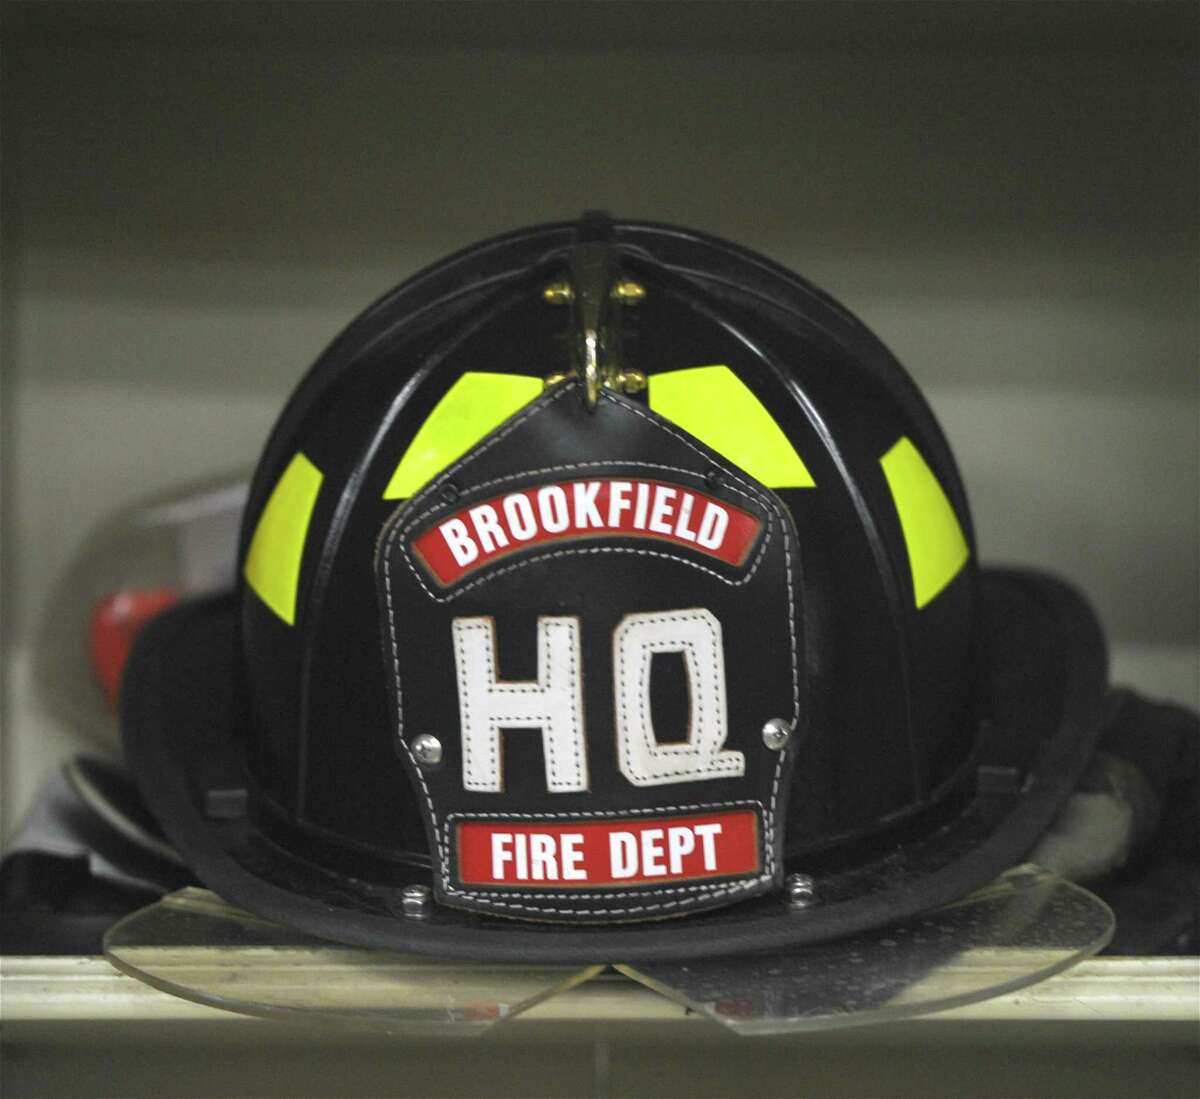 The Brookfield Volunteer Fire Company held an open house on Saturday, along with other fire departments in the area, to celebrate Volunteer Firefighter Day and the start of National Volunteer Week (April 10-16). They hope to get the work out about the shortage of volunteer firefighters. April 9, 2016, in Brookfield Conn.